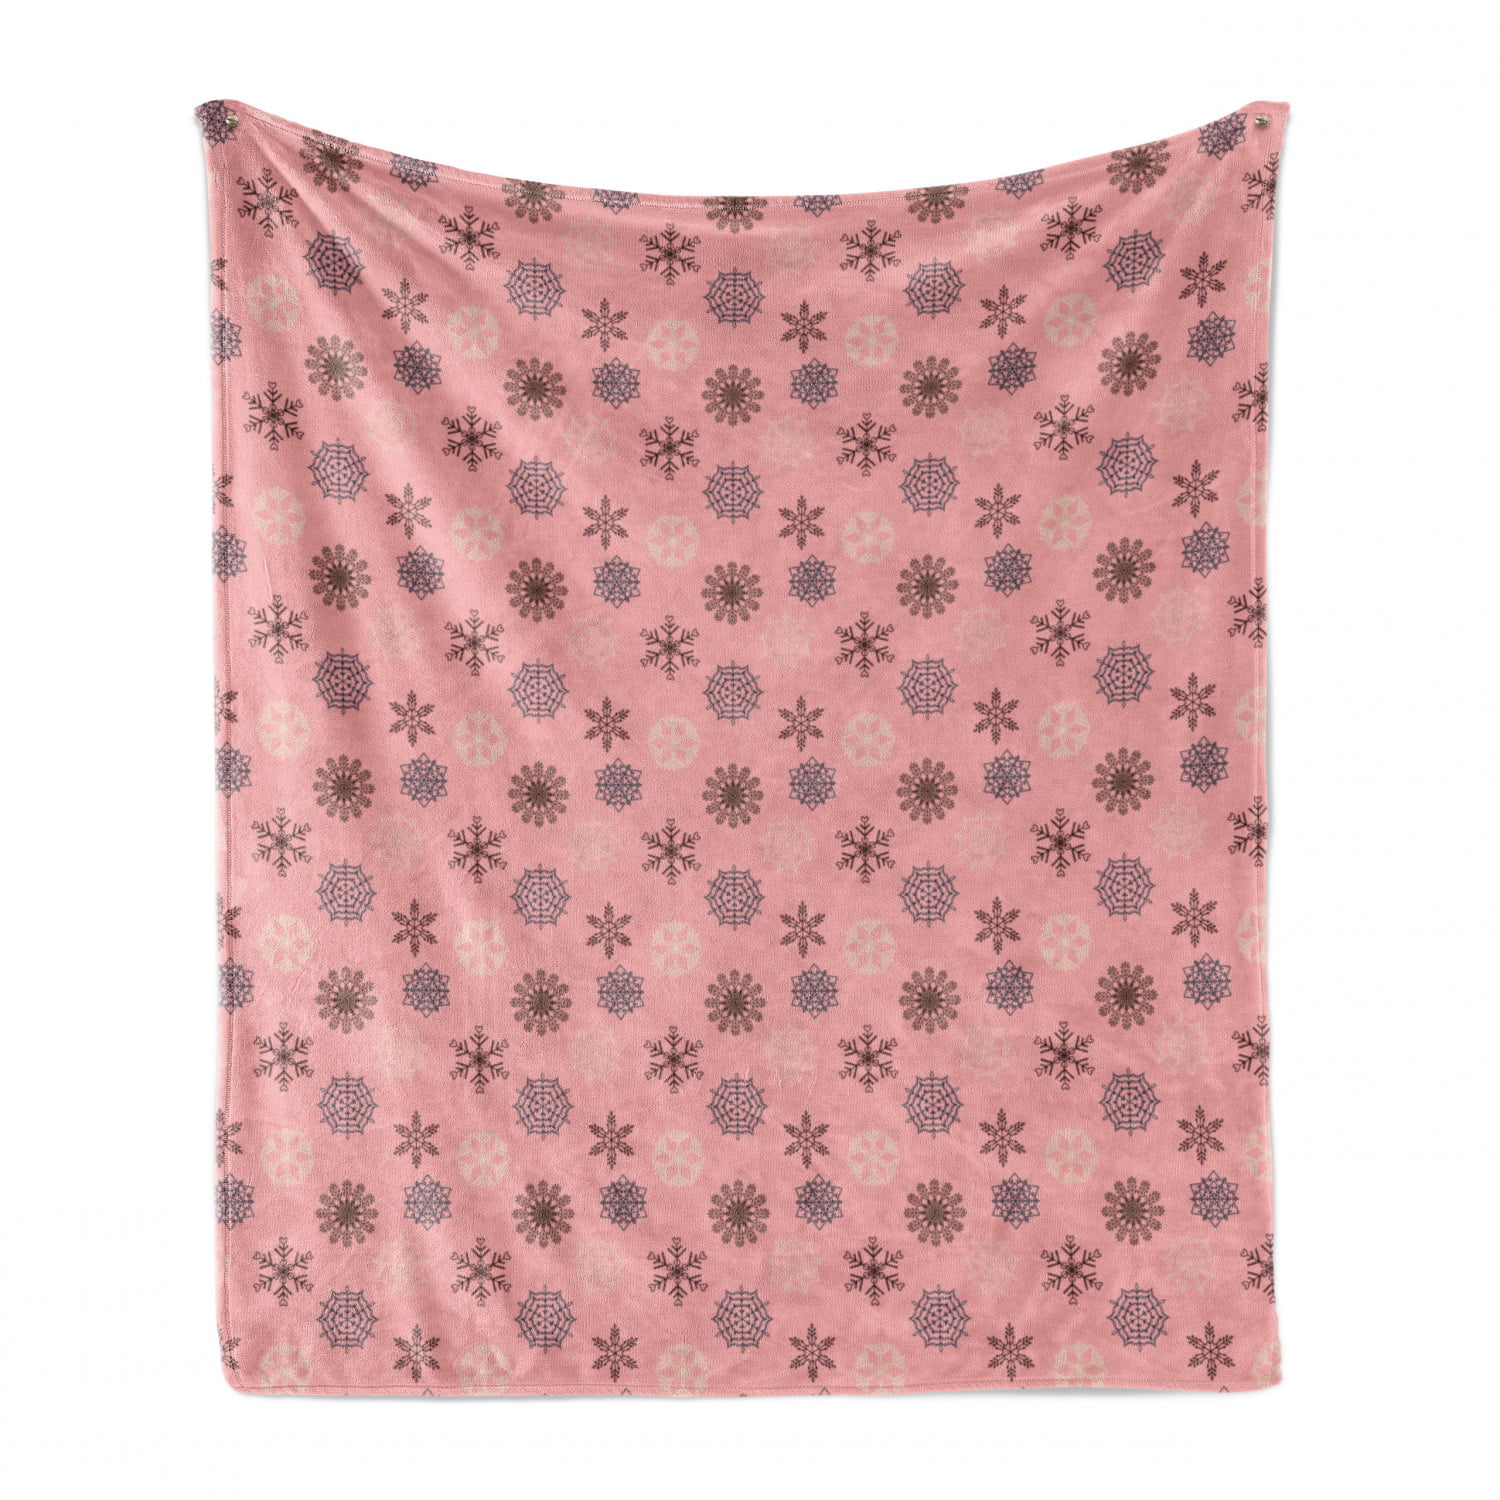 Cozy Plush for Indoor and Outdoor Use Snowflakes in Various Details and Designs Pastel Toned Repetition Pale Pink and Dark Cocoa 60 x 80 Ambesonne Winter Soft Flannel Fleece Throw Blanket 